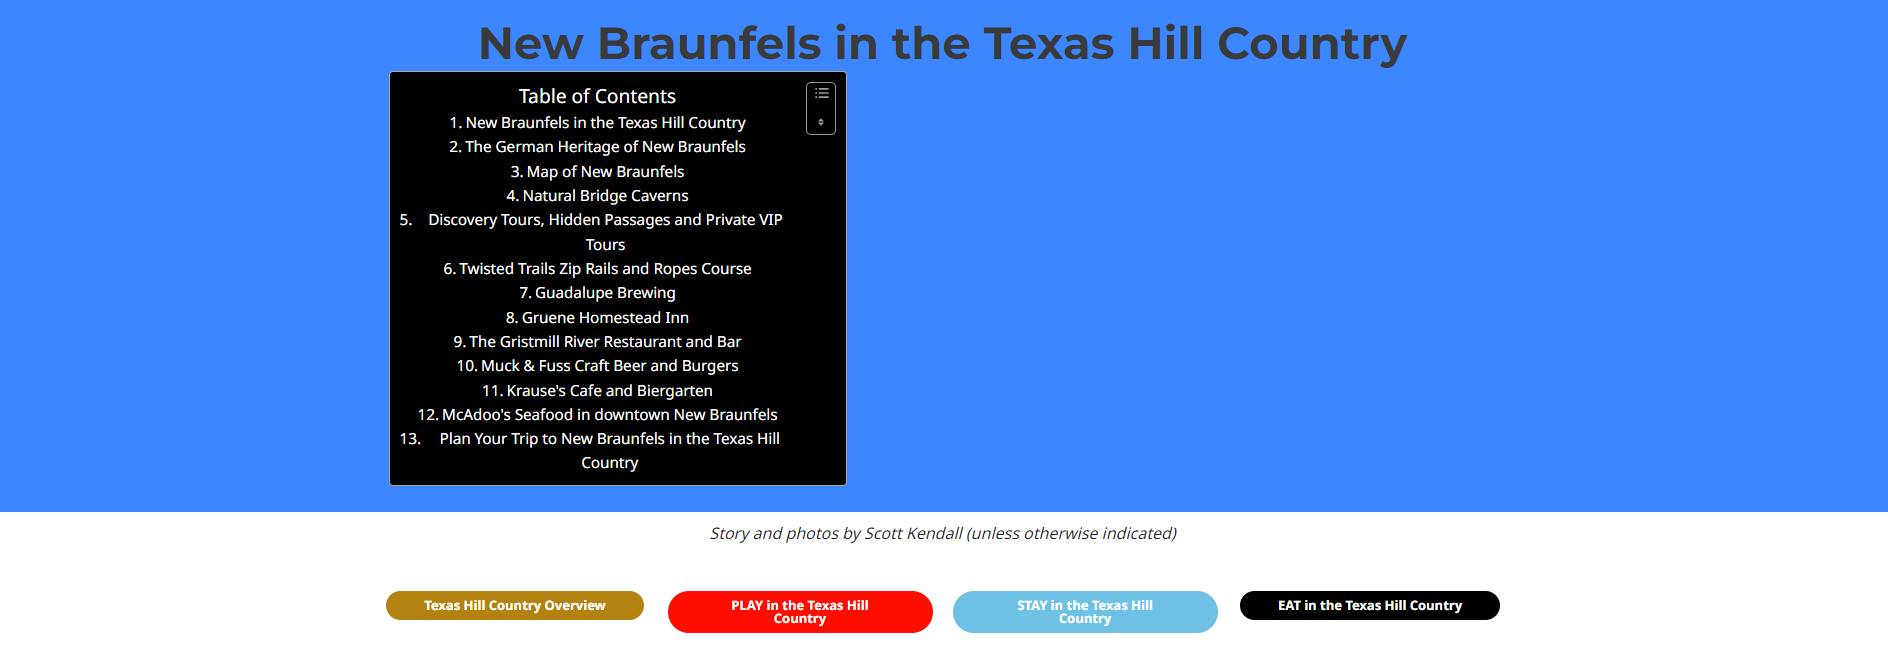 New Braunfels in the Texas Hill Country